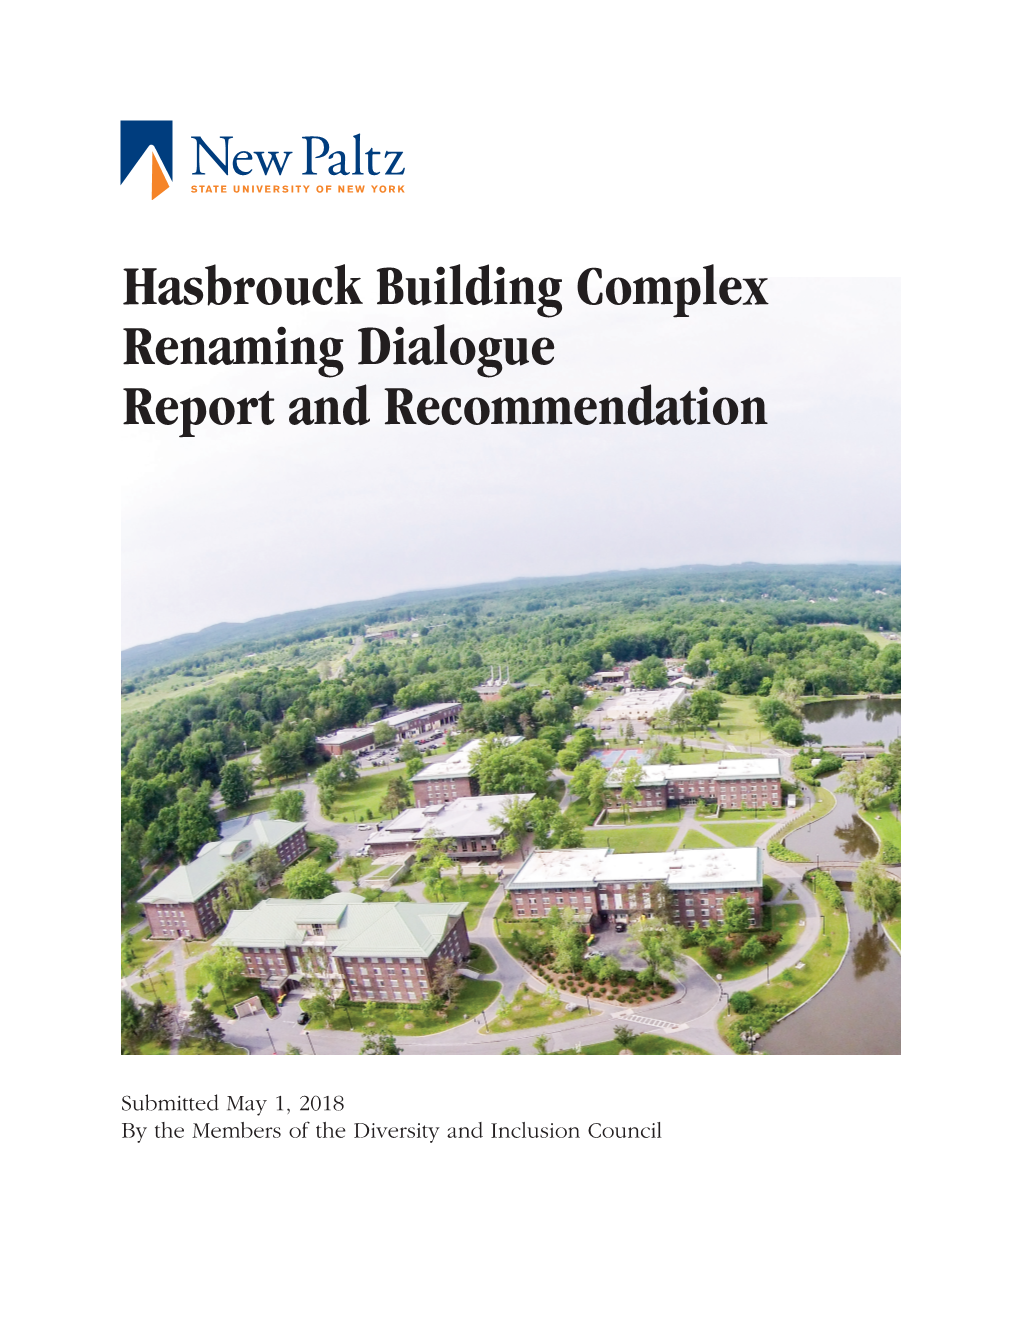 Hasbrouck Building Complex Renaming Dialogue Report and Recommendation